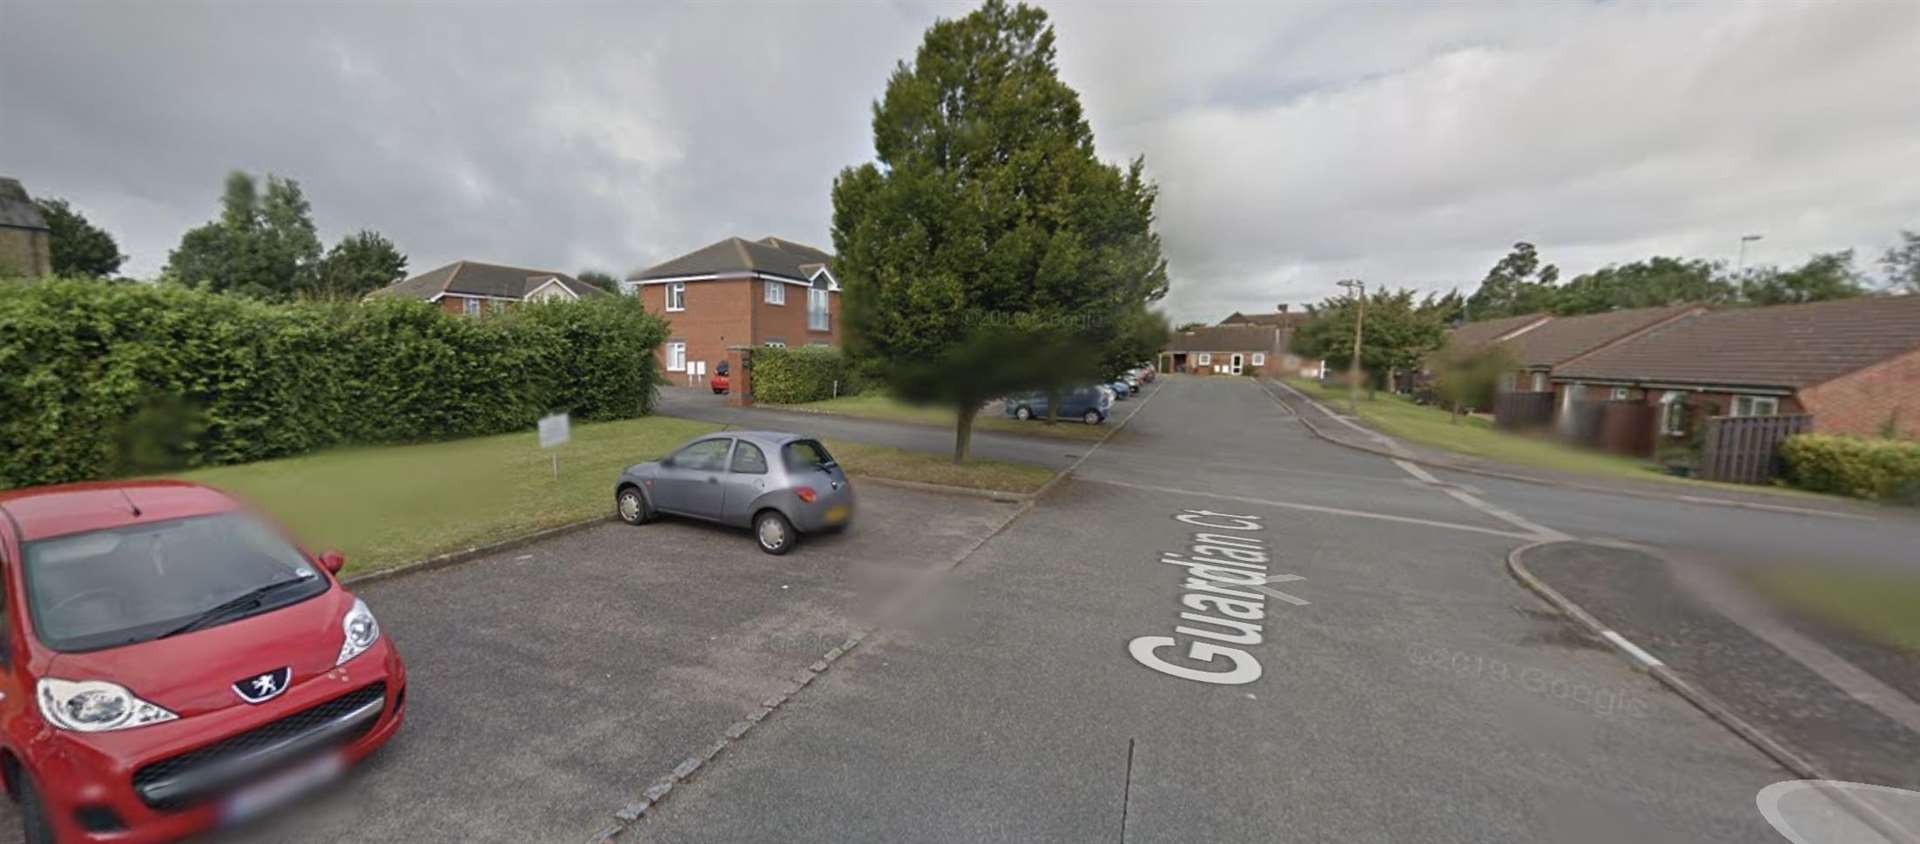 The woman was spotted near Guardian Court in Rainham. Picture: Google Street View